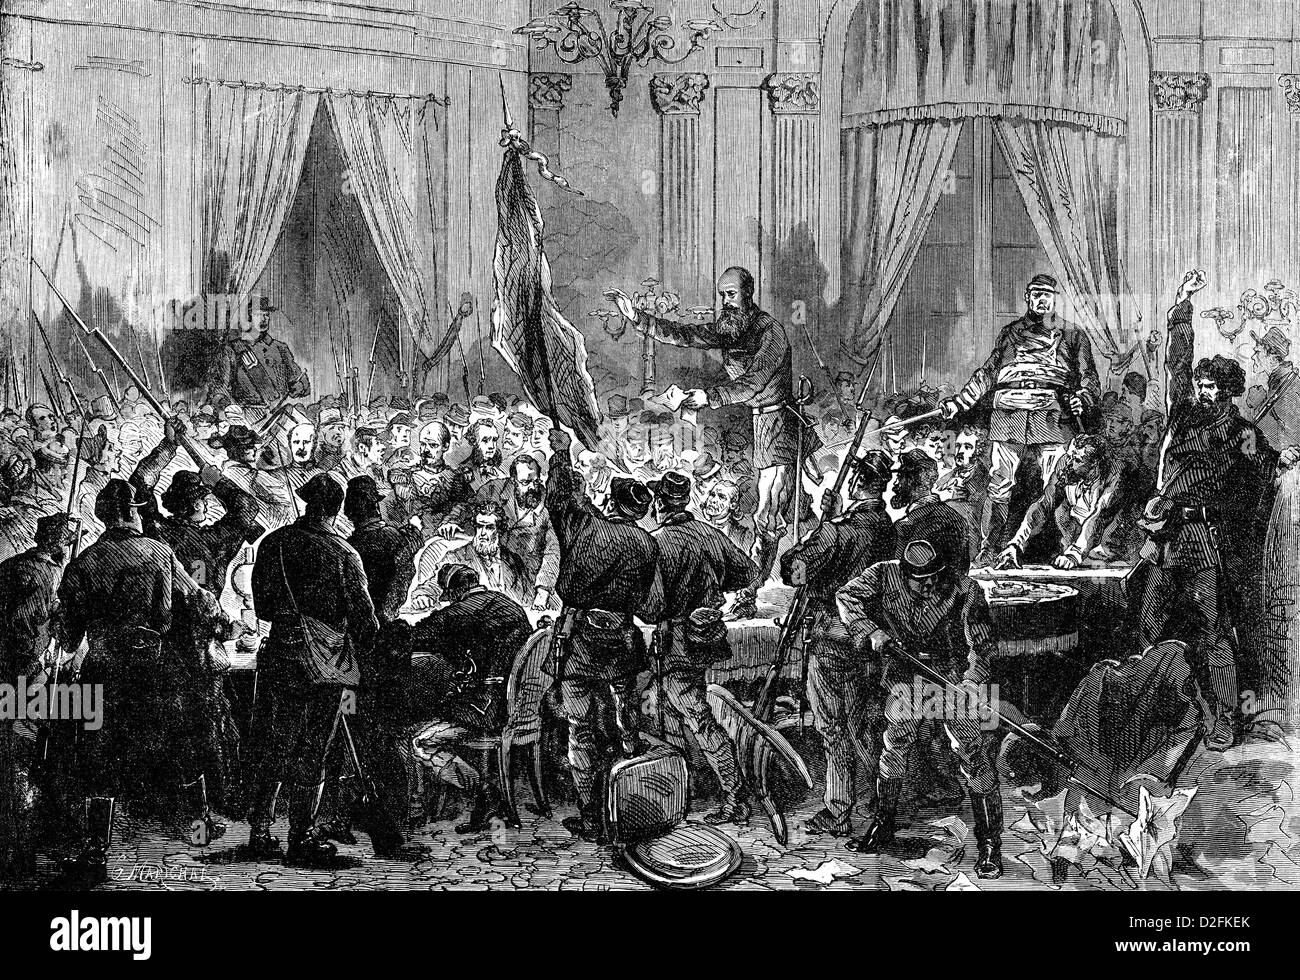 meeting-room-of-the-government-through-the-paris-communards-on-31-D2FKEK.jpg